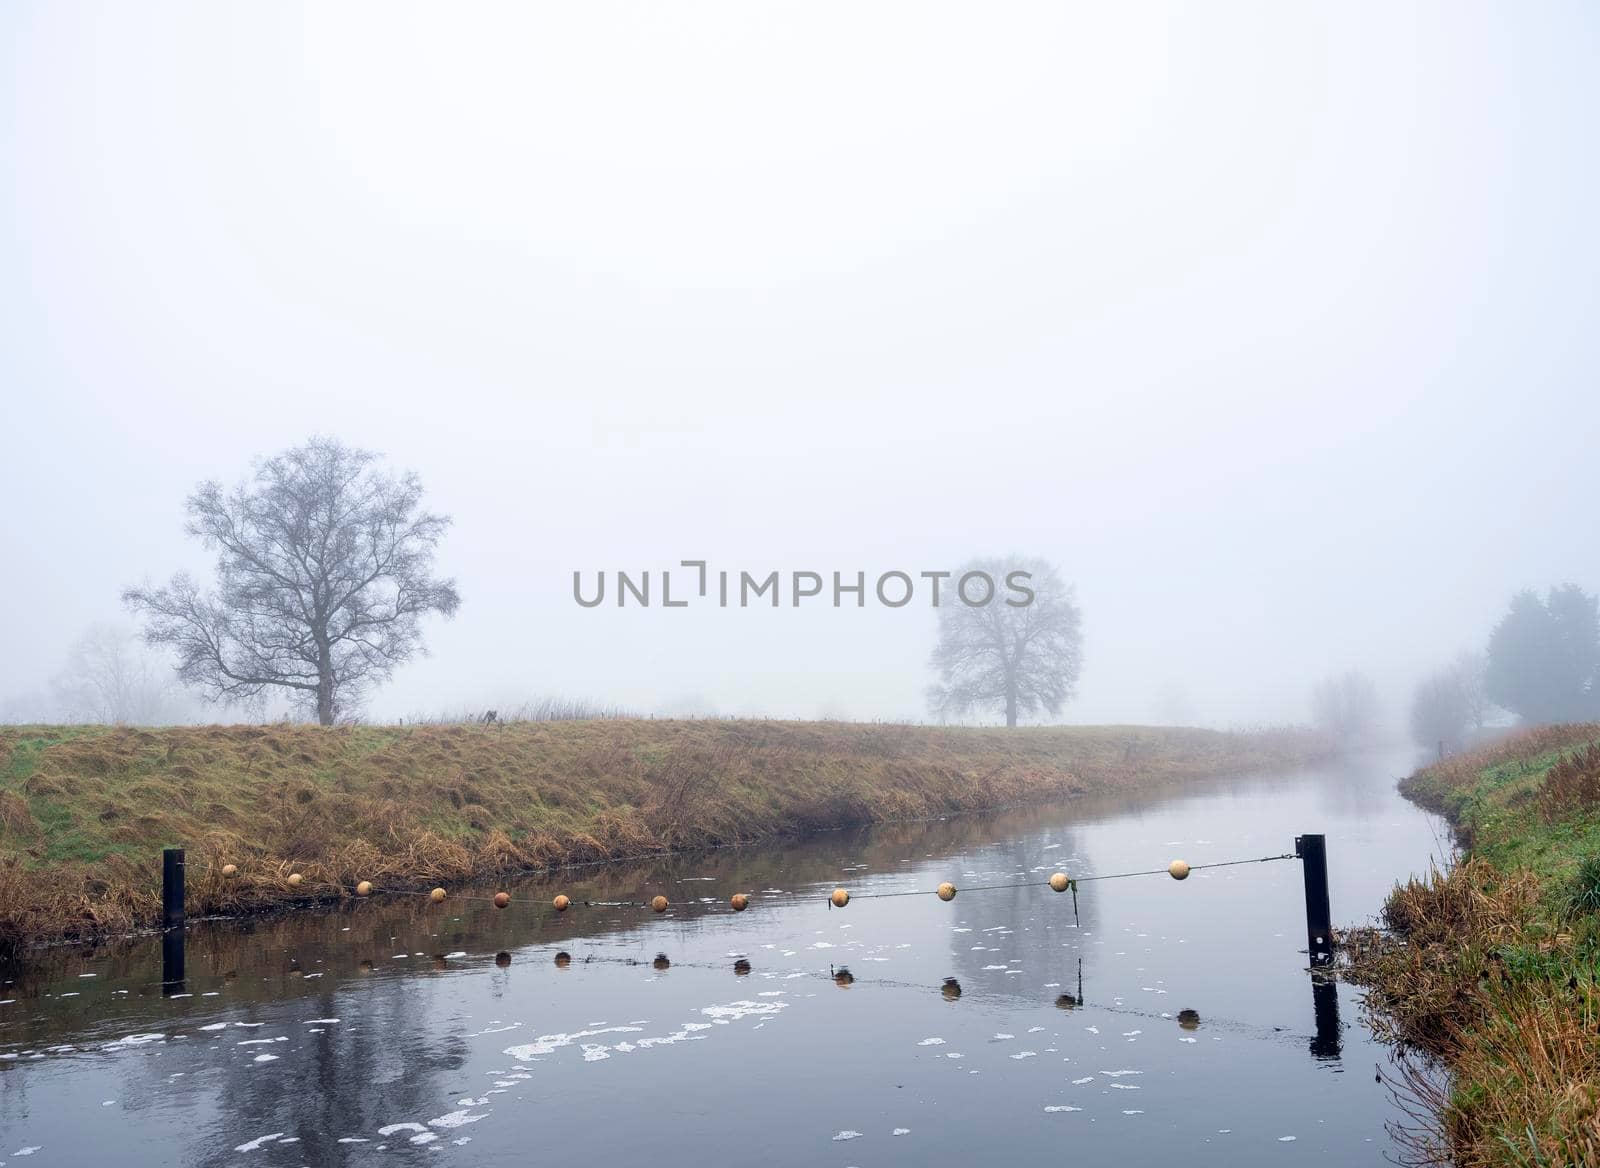 valleikanaal or valley canal near veenendaal in the netherlands on misty winter day by ahavelaar